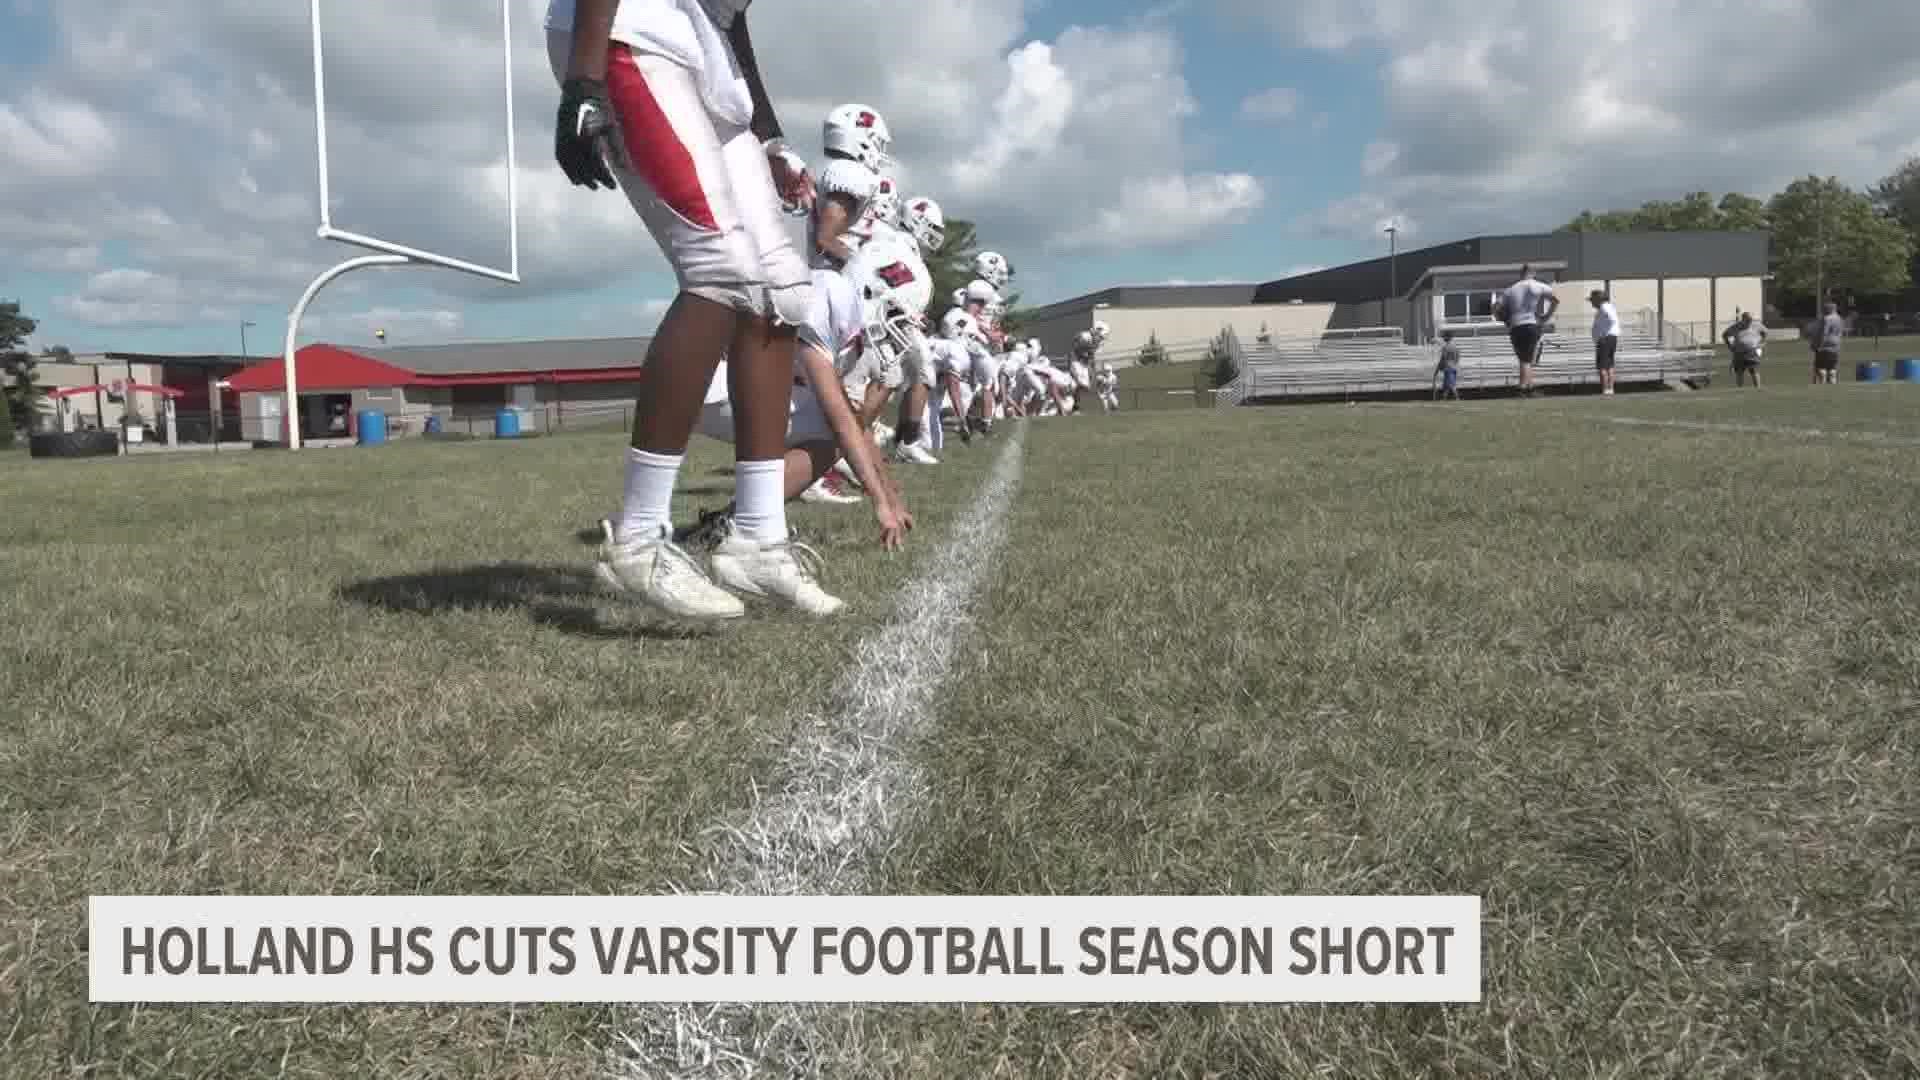 Holland Public Schools announced that the high school varsity football will be cutting its season short due to lack of players.